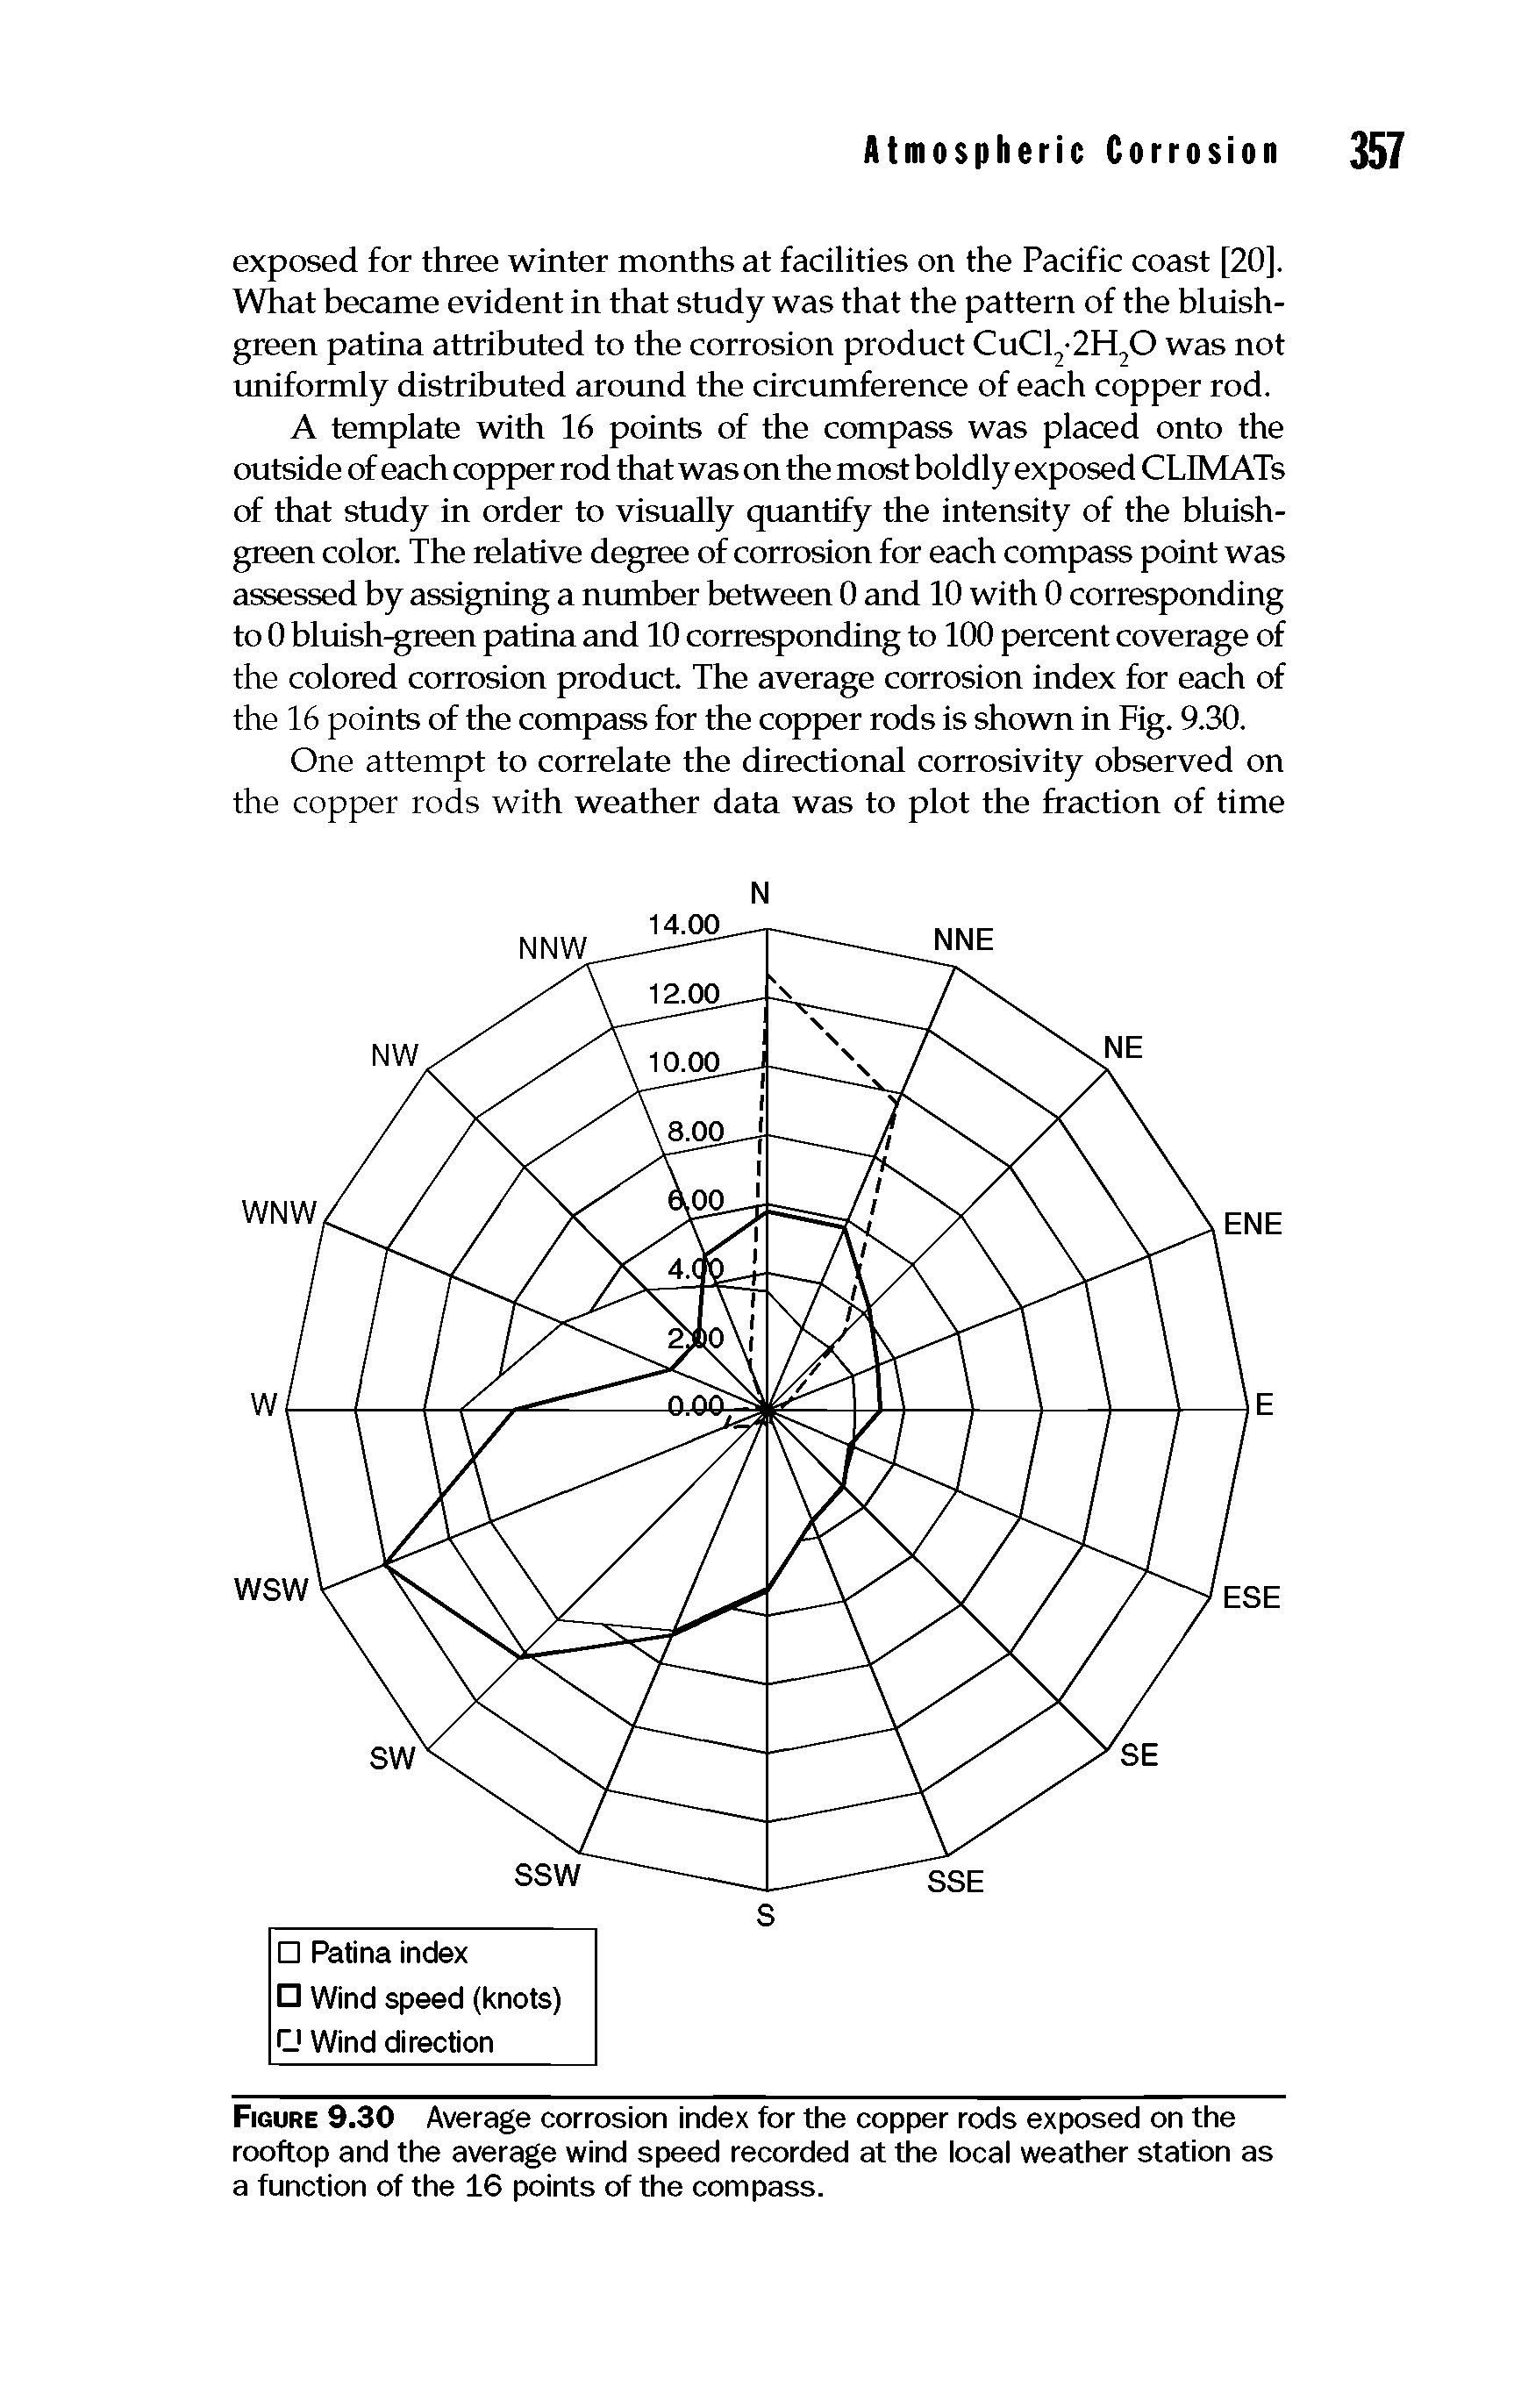 Figure 9.30 Average corrosion index for the copper rods exposed on the rooftop and the average wind speed recorded at the local weather station as a function of the 16 points of the compass.